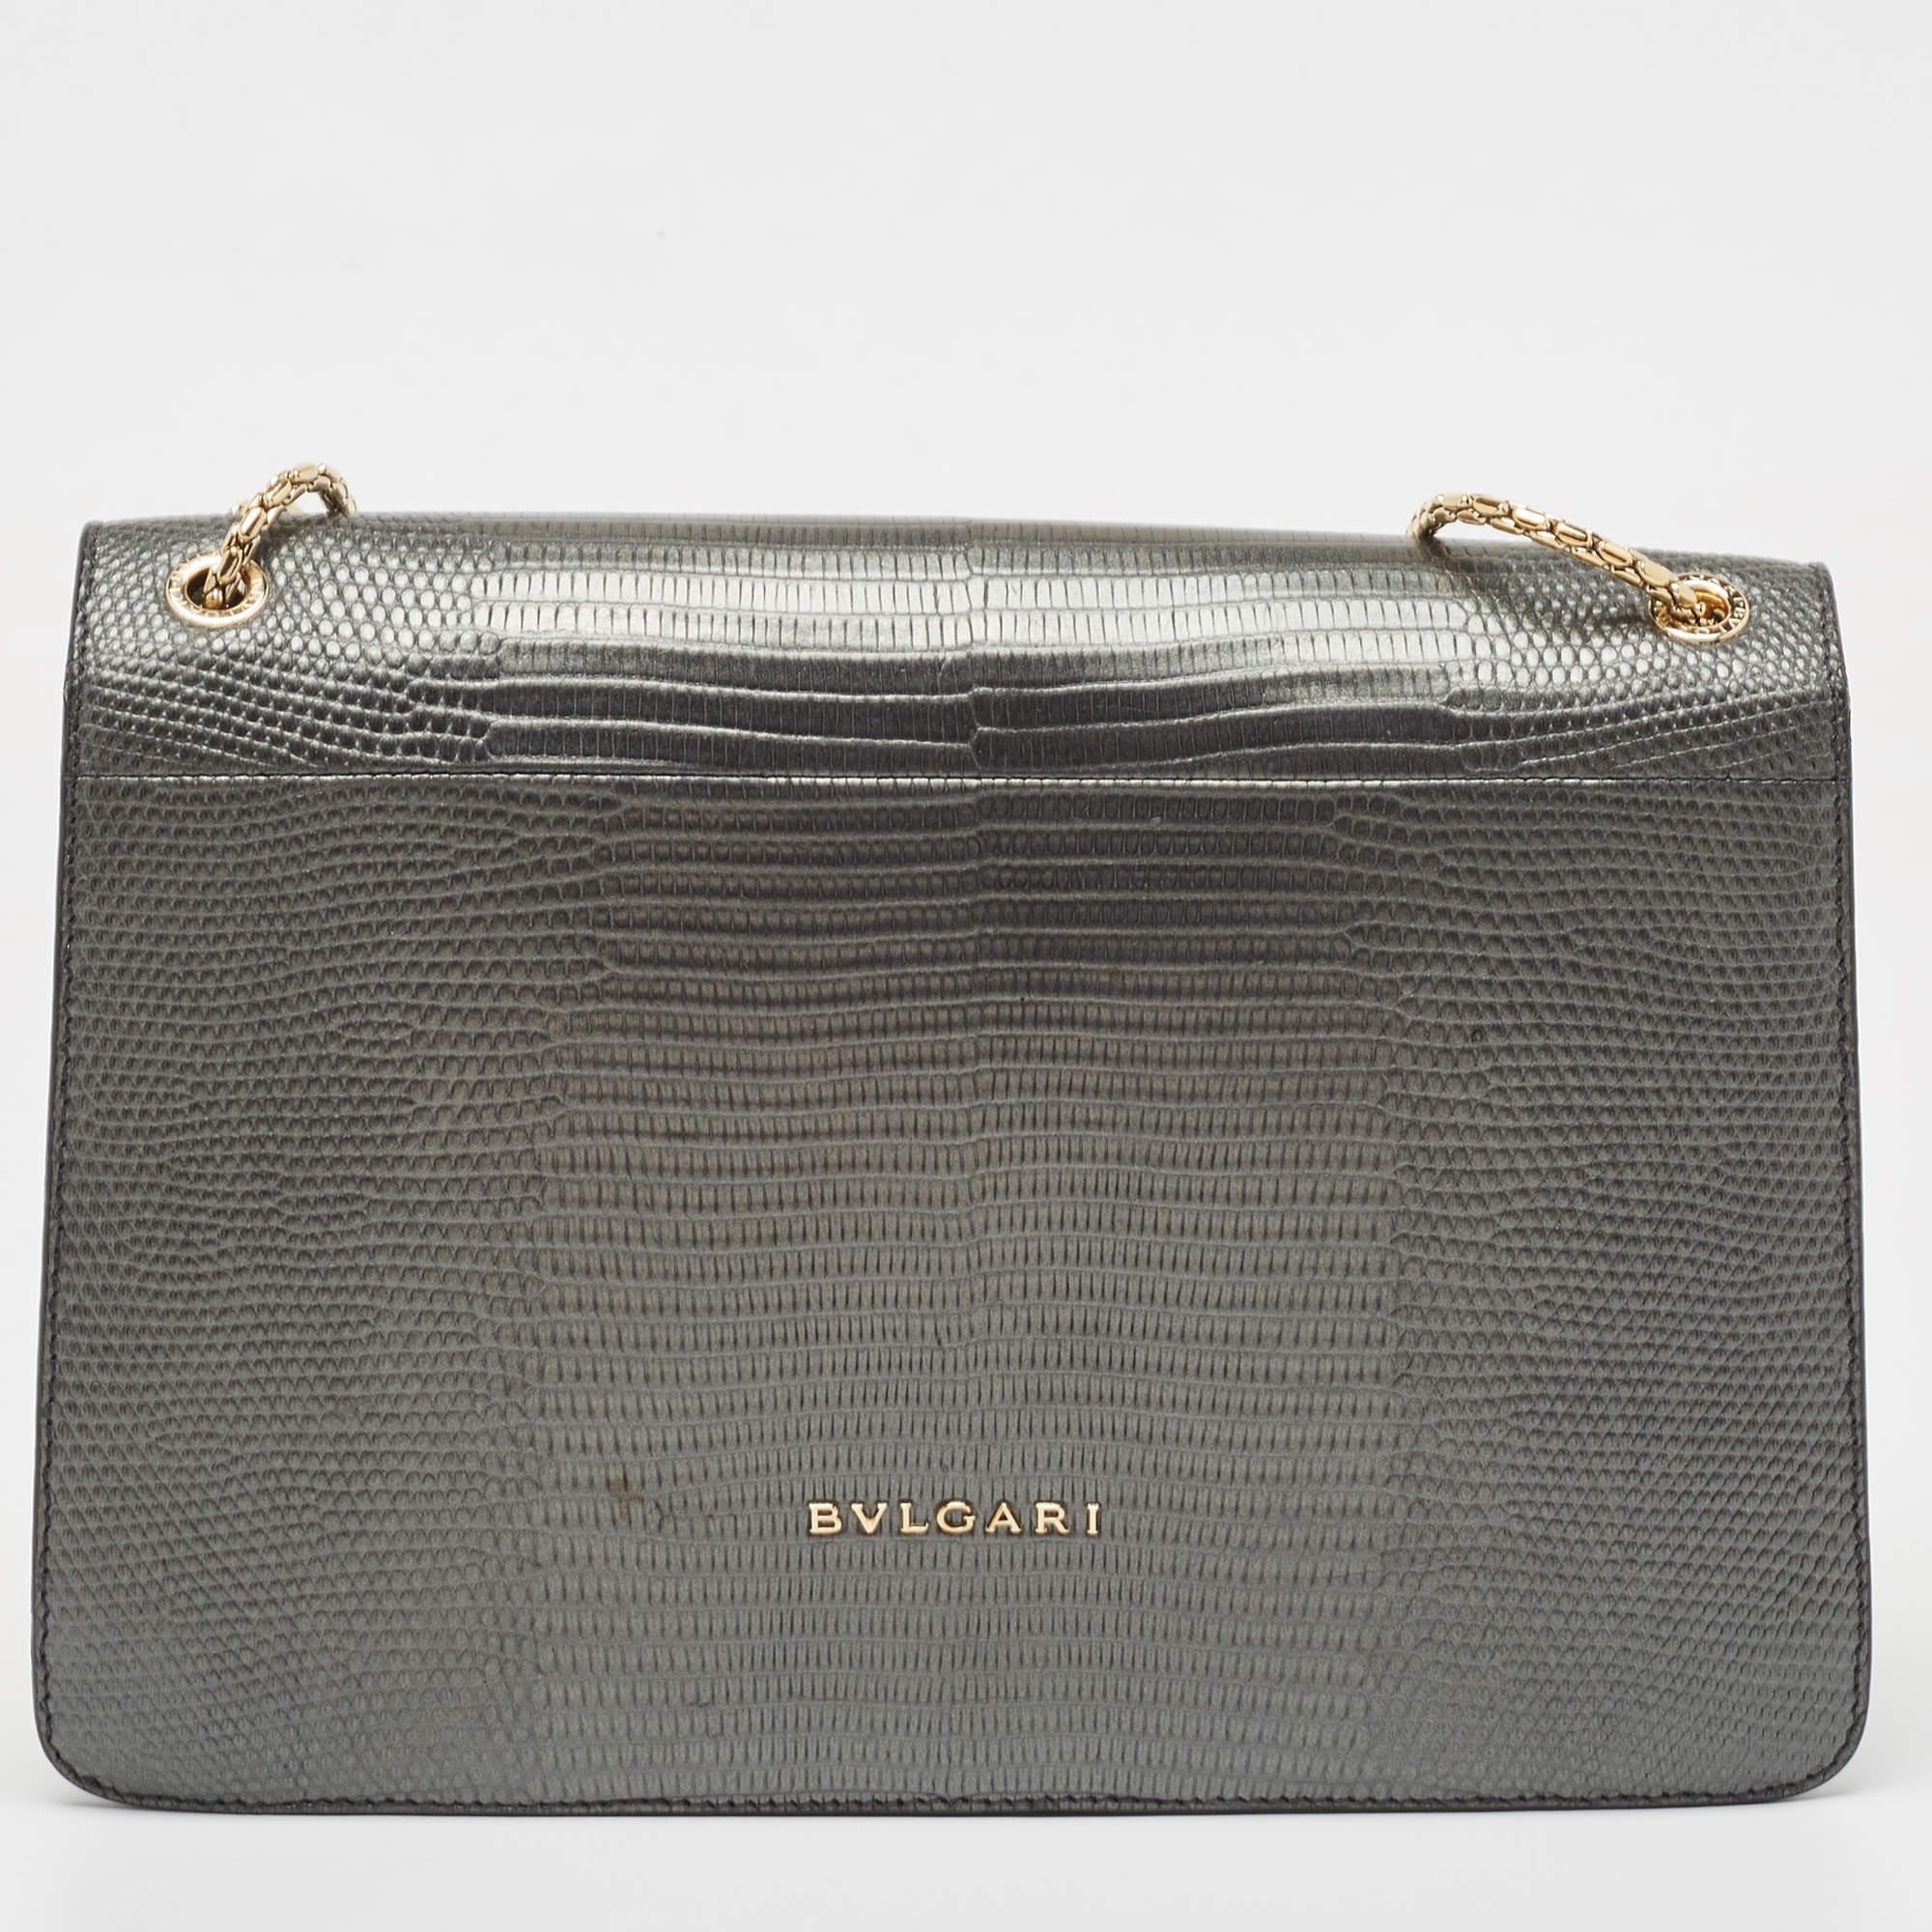 Most designs from Bvlgari, with their striking elements, pay tribute to the Roman roots, and this bag is no different. Made from Karung leather, it is an accessory of utility and luxury. Perfectly sized, the interior has enough room to dutifully